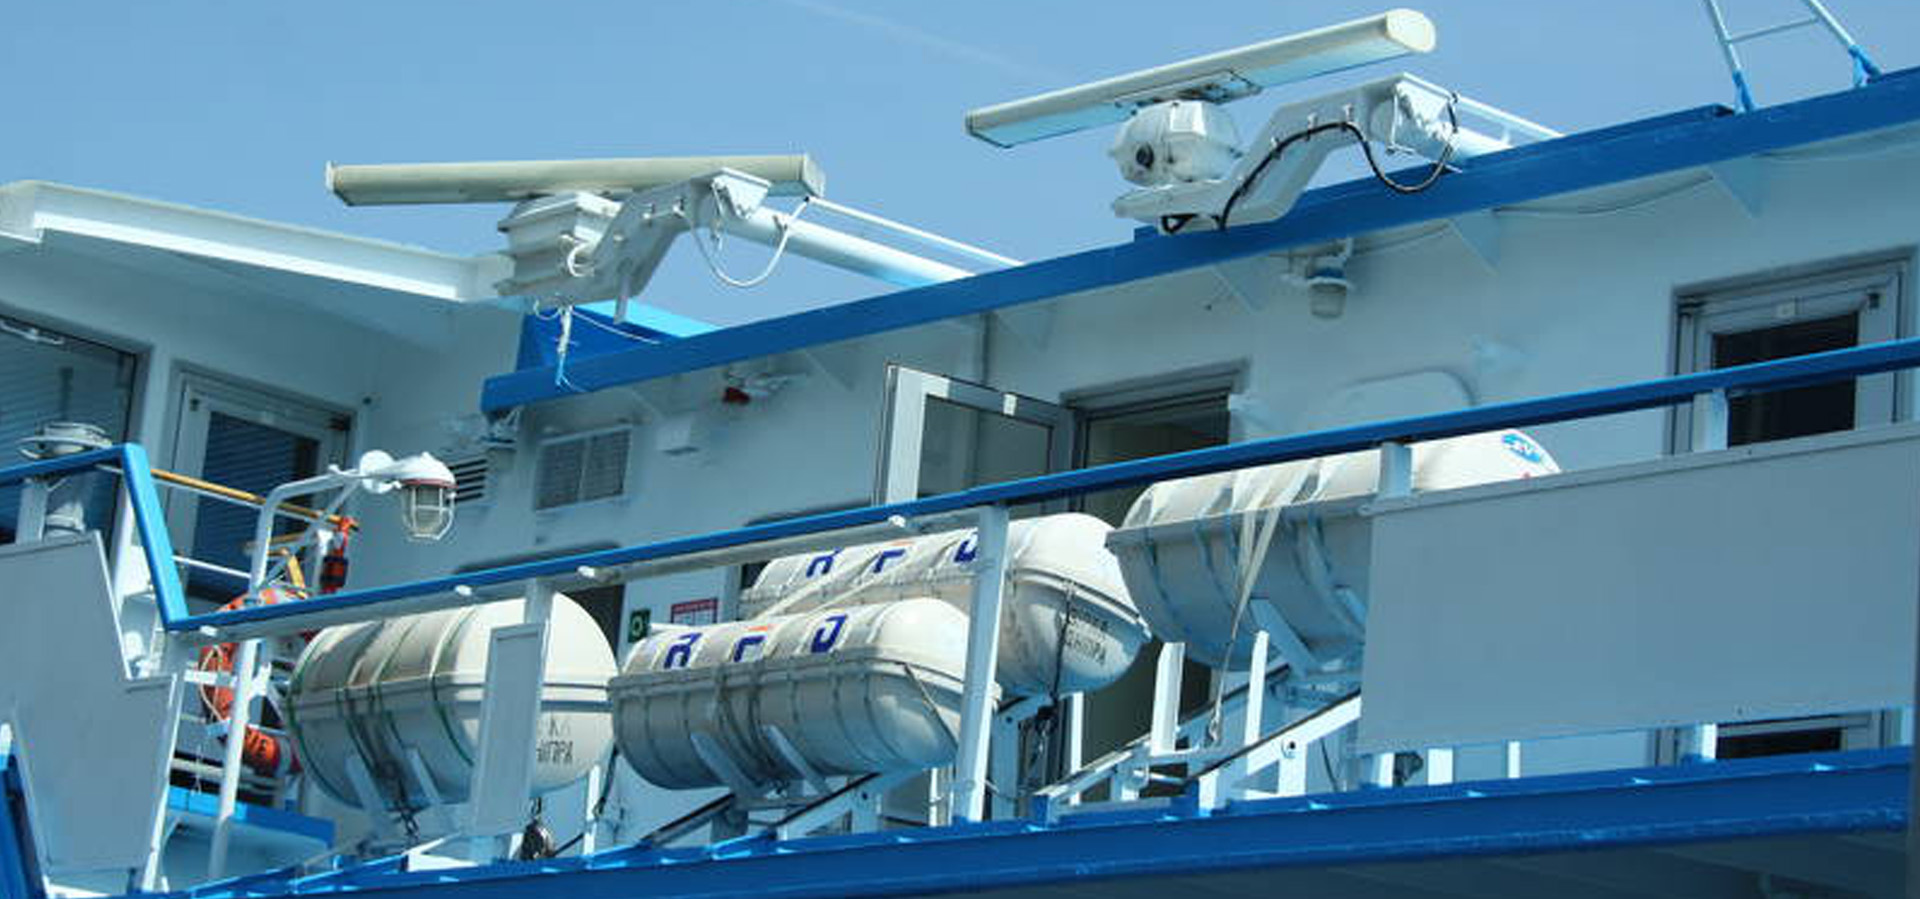 Your Vessel deserves the best protection for your operations